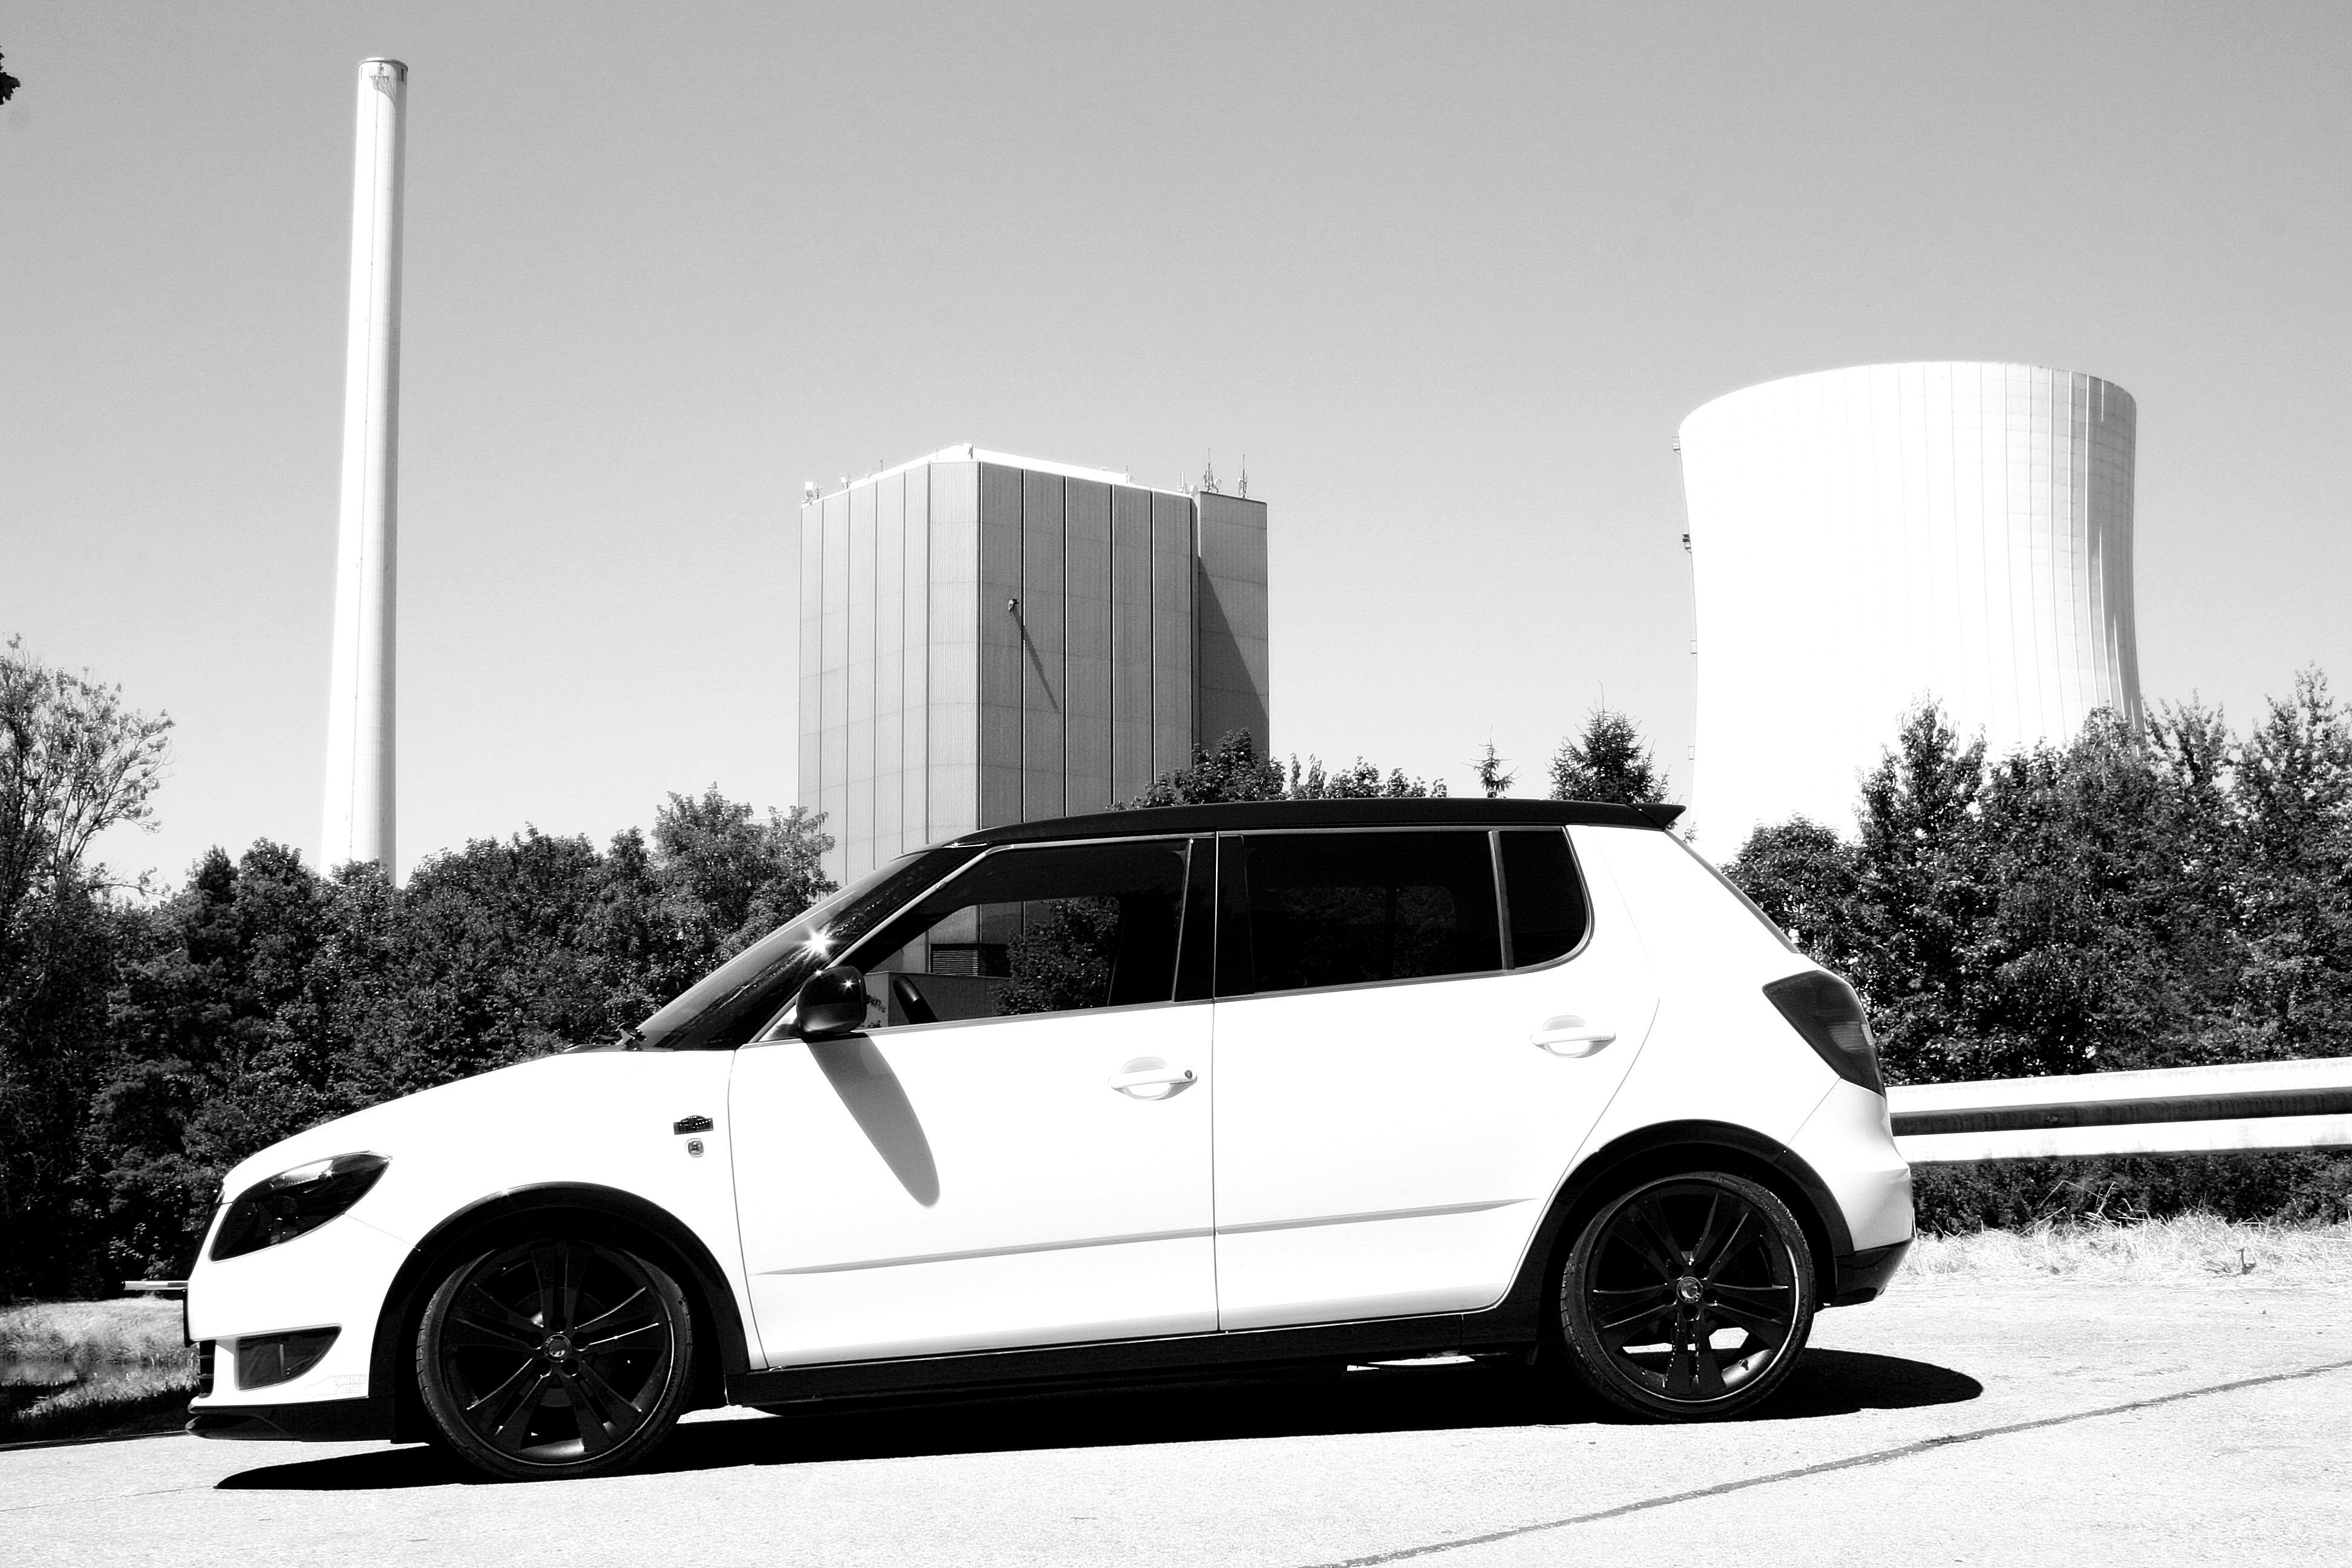 General 3888x2592 Skoda car street road tuning monochrome photography power plant nuclear power plant vehicle hatchbacks Czech cars Volkswagen Group